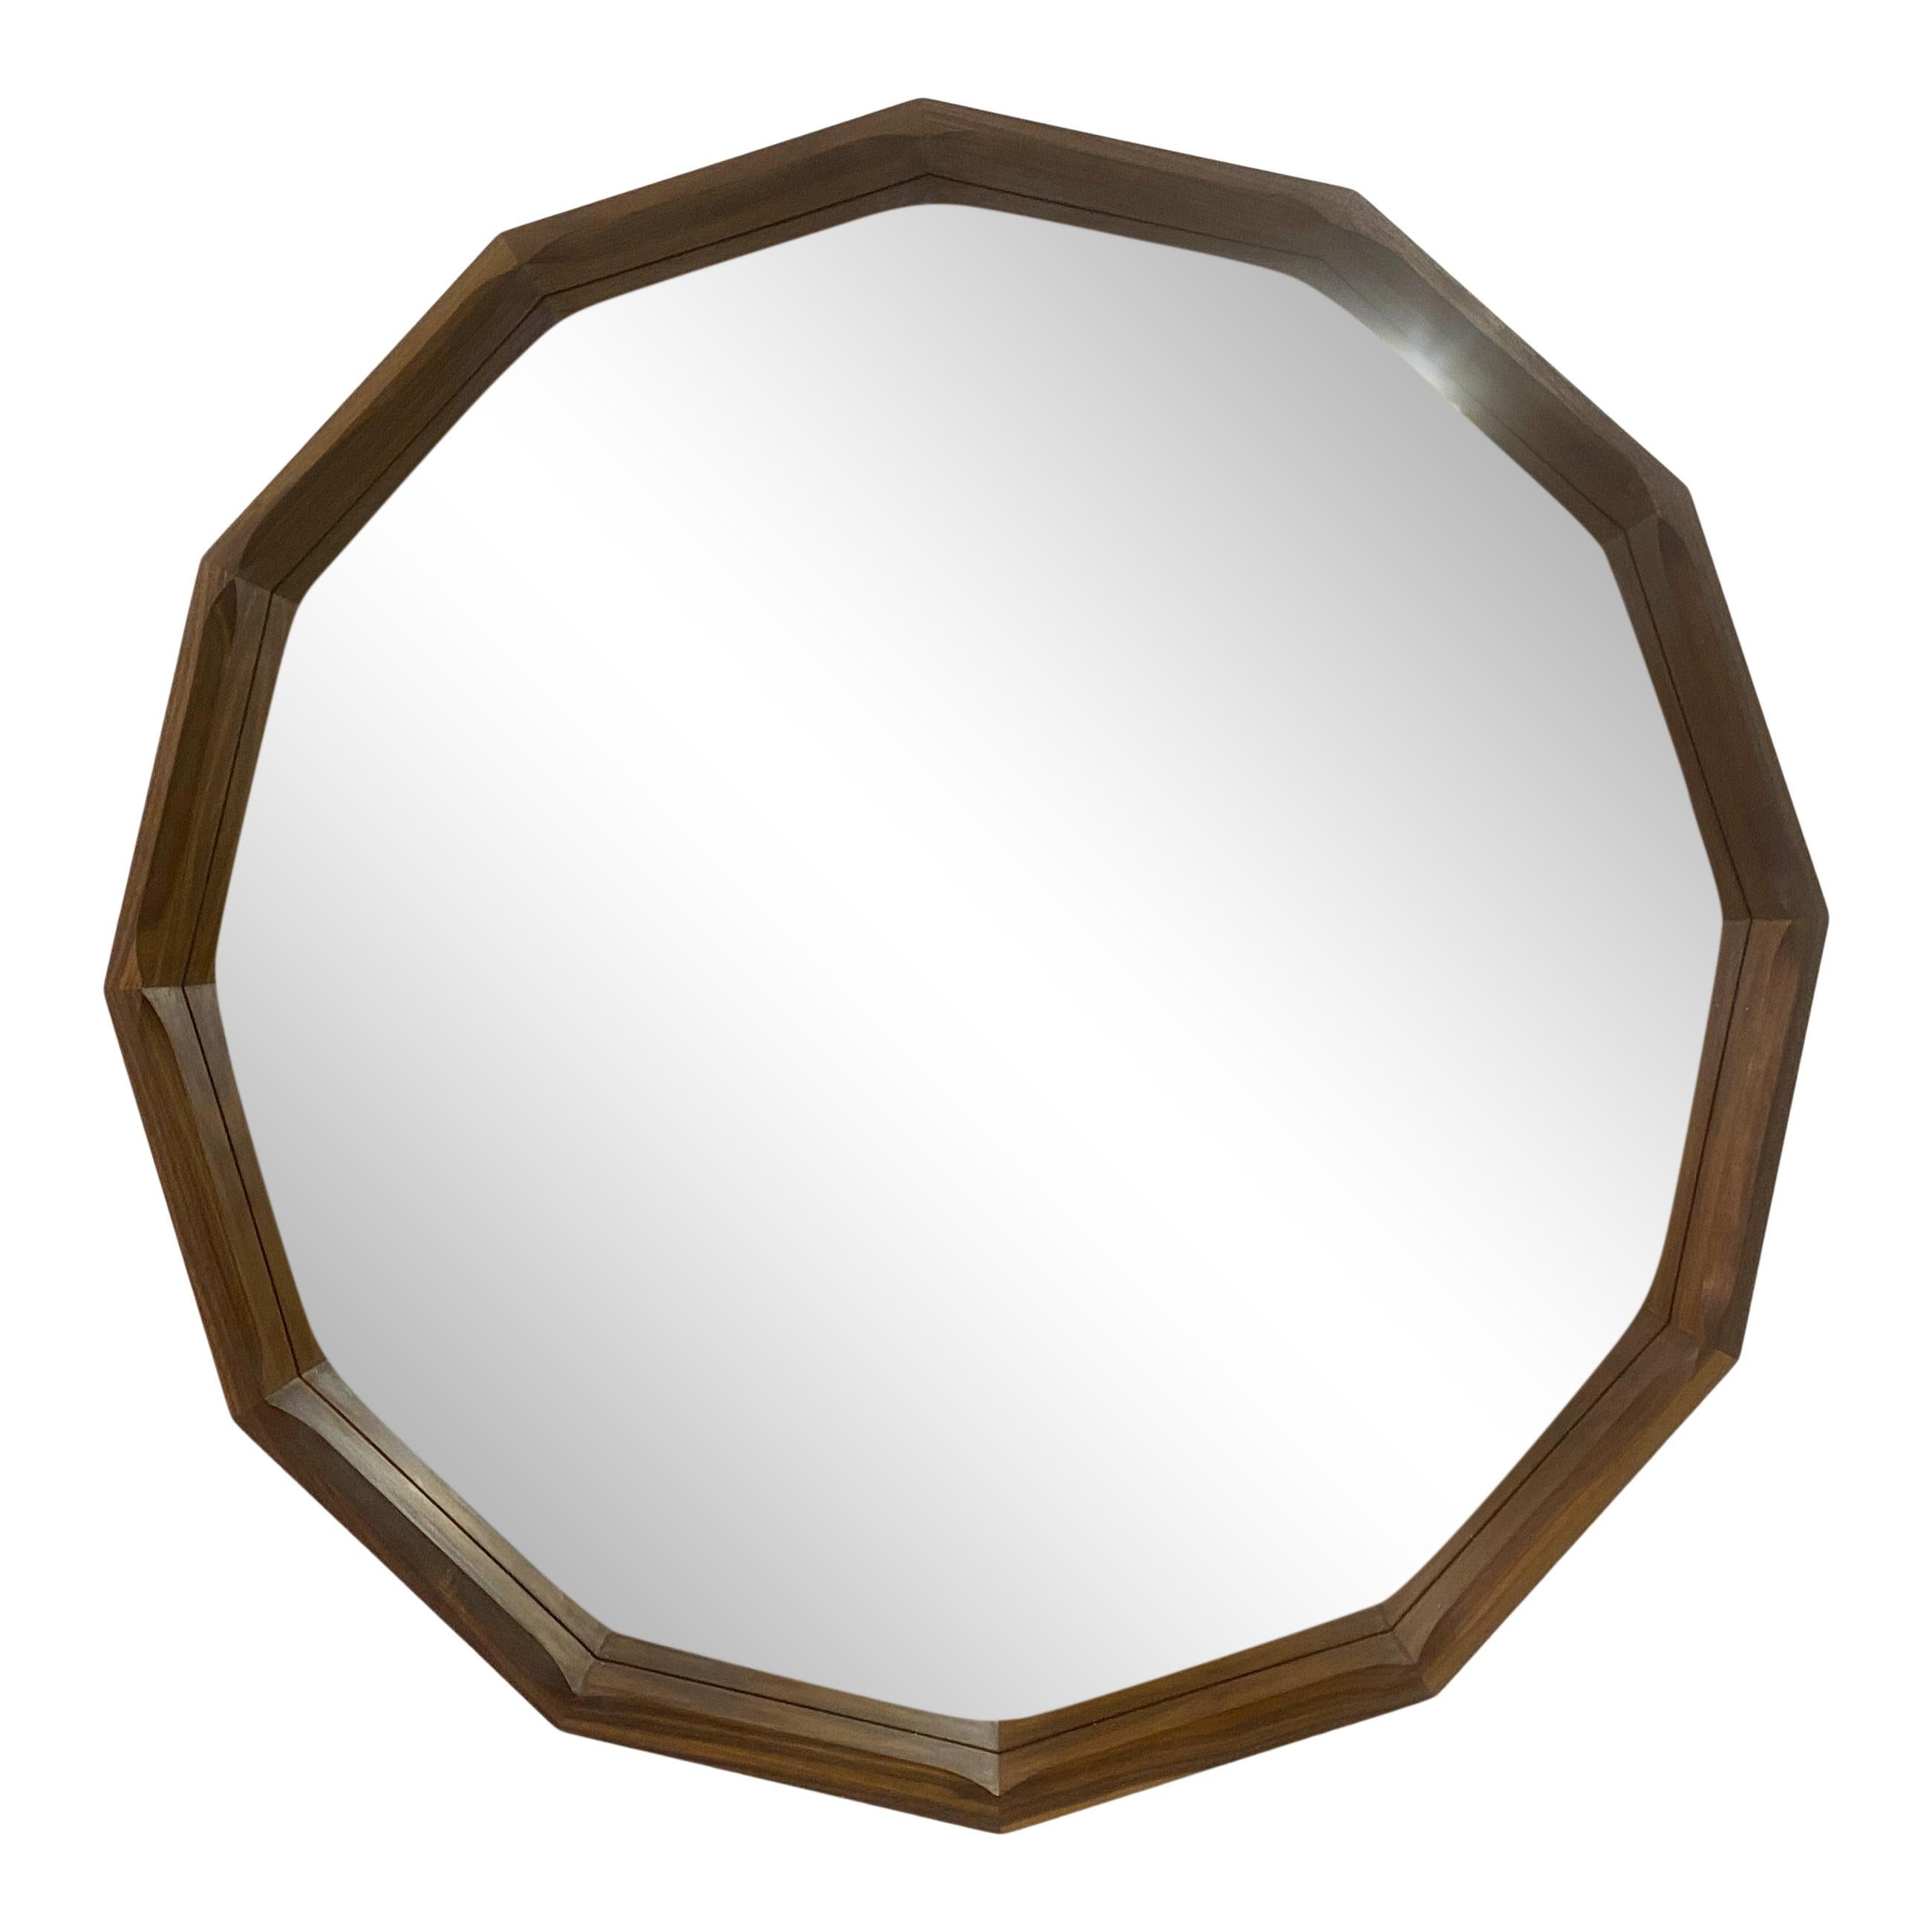 Pair of mirrors

Stained walnut frame

Dodecagonal

Made in Italy

Can be made to order in any quantity.